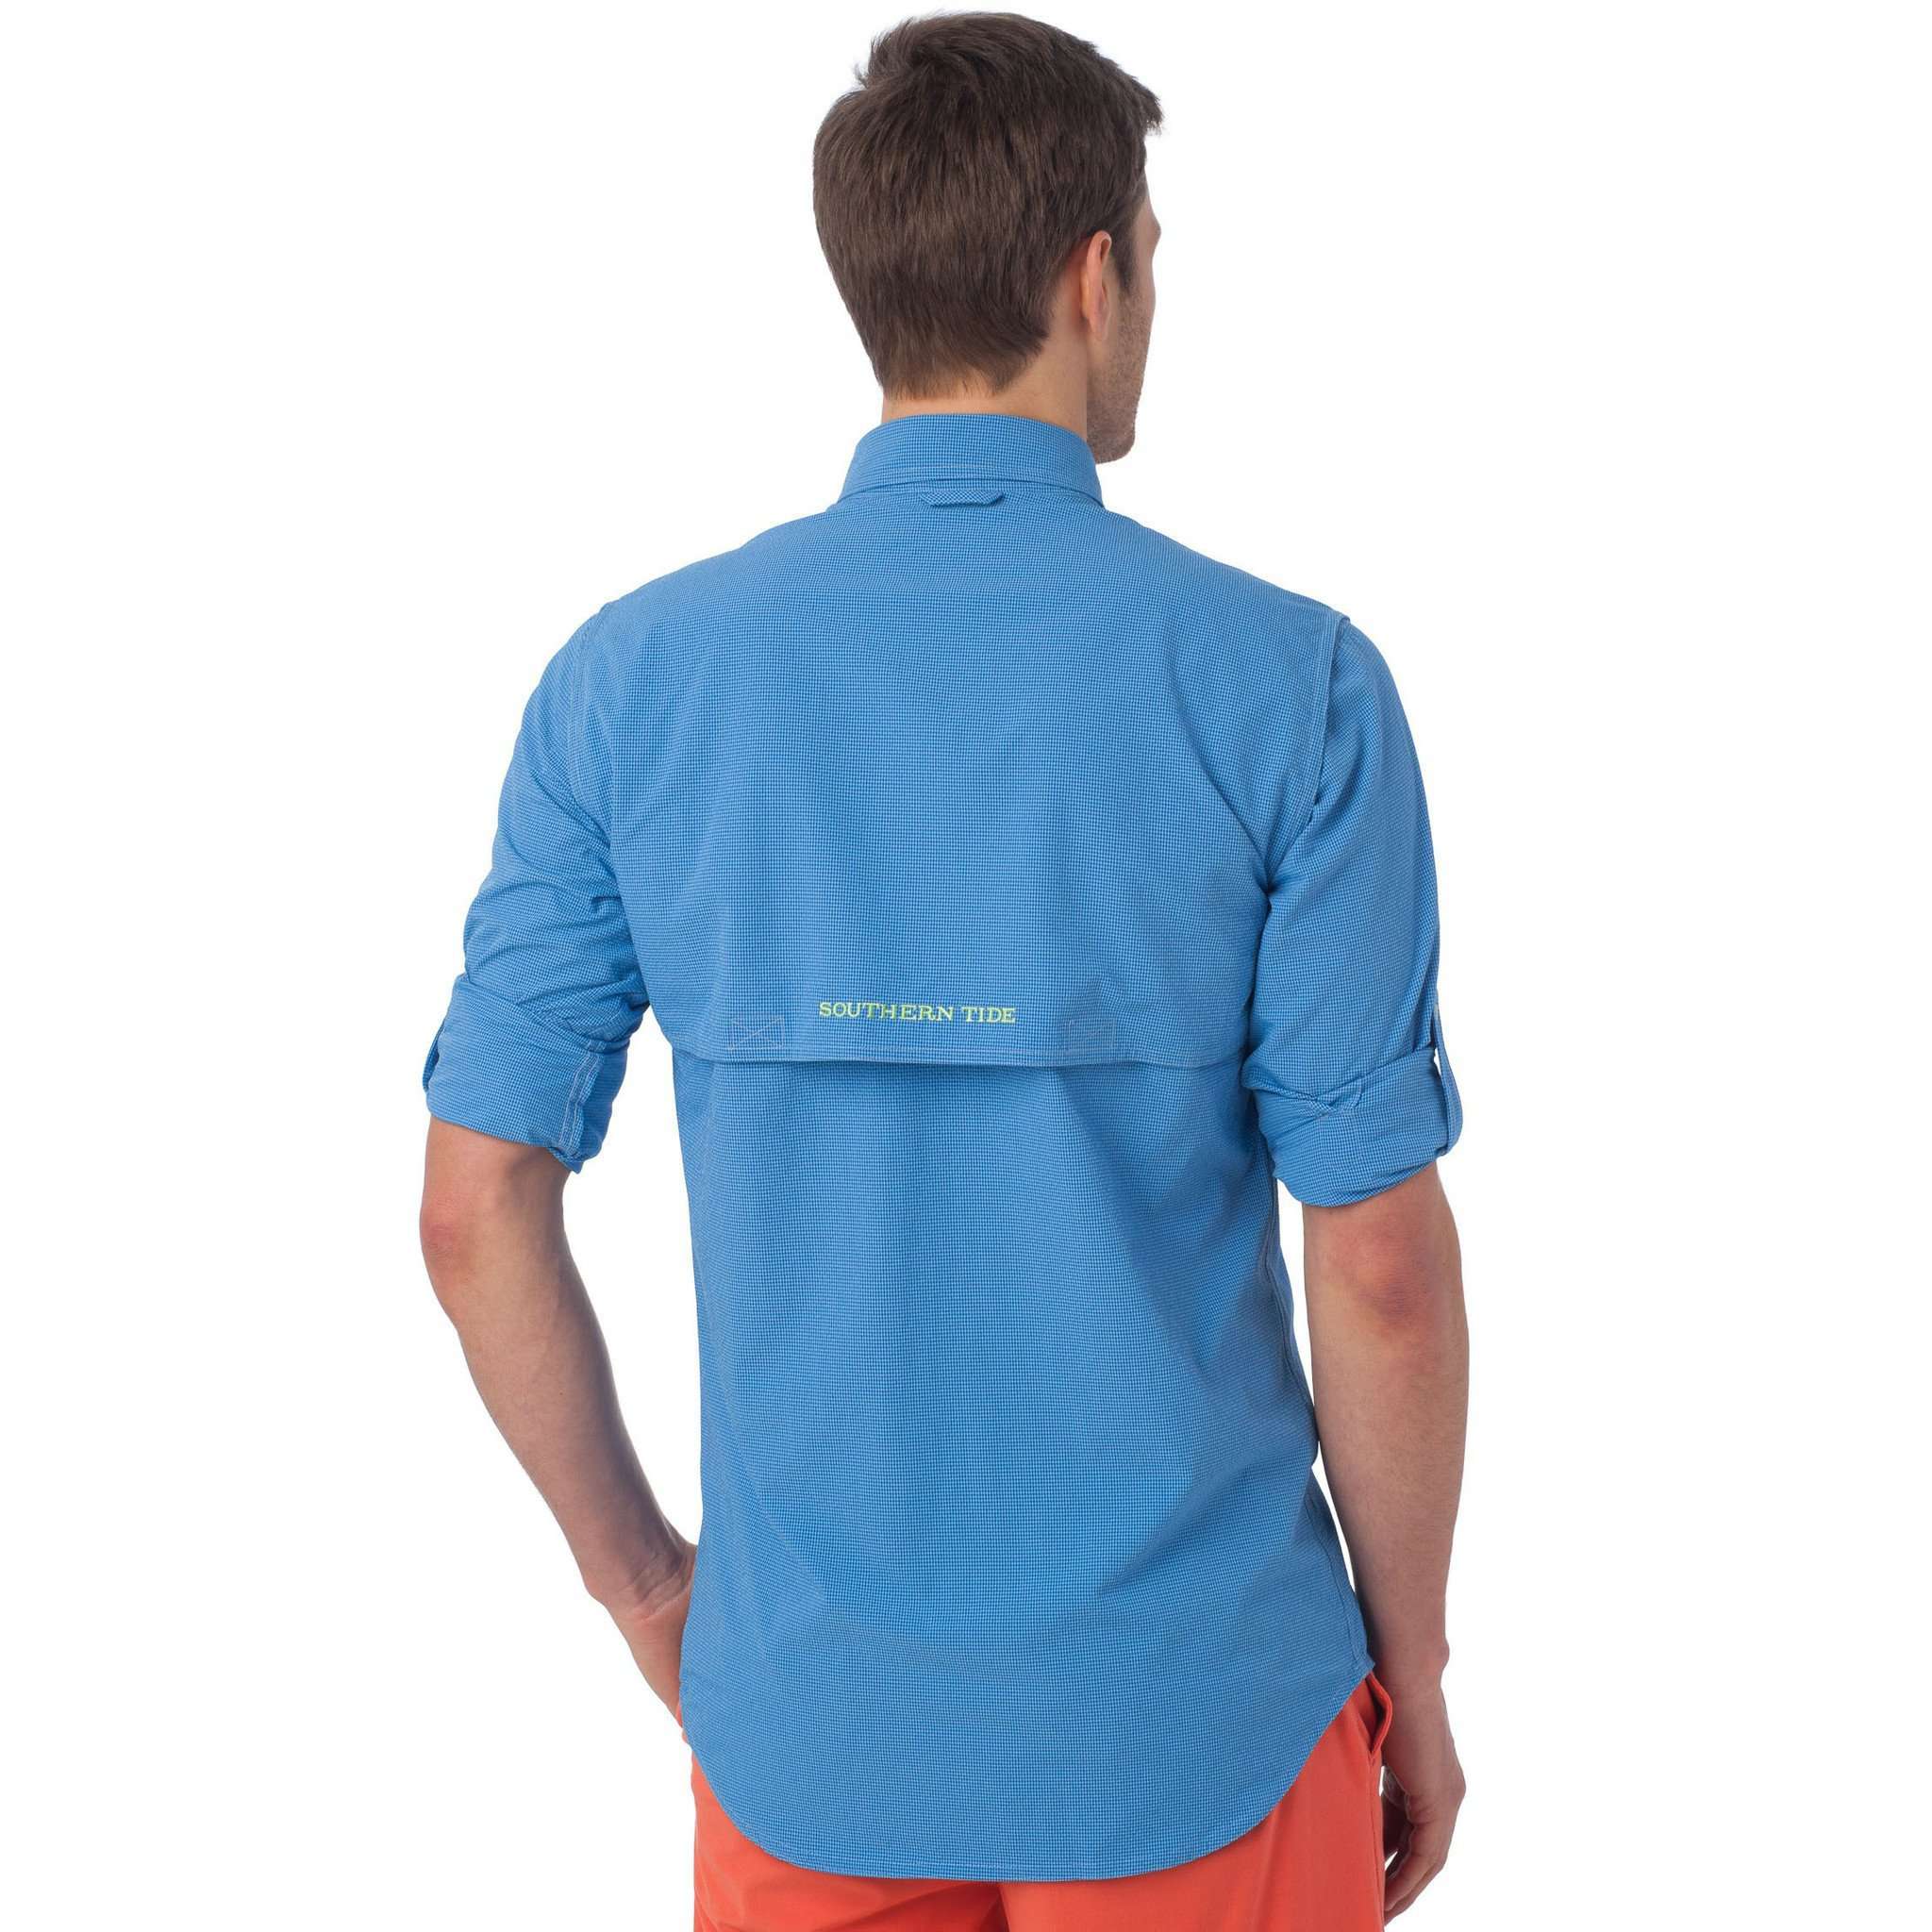 Marlin Check Fishing Shirt in Royal Blue by Southern Tide - Country Club Prep